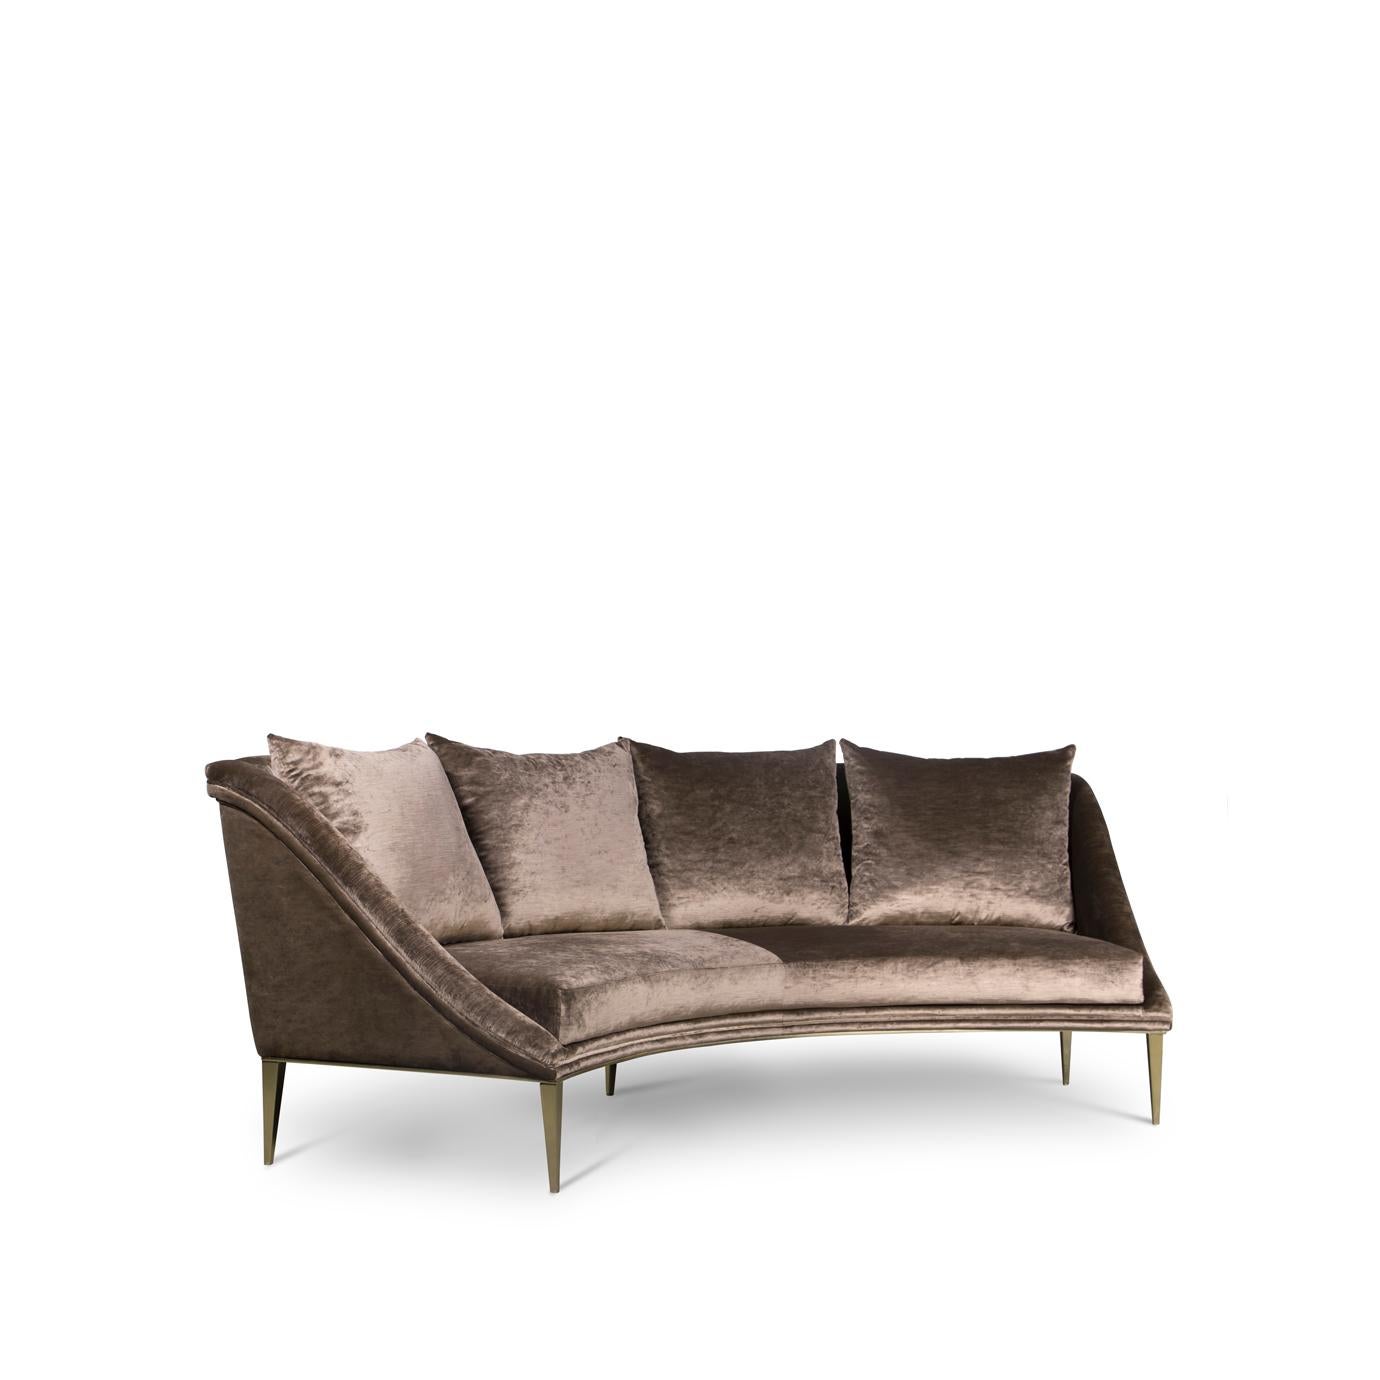 Designed to perform in a matter that indulges the eyes, the Geisha's curves grace a room with the extravagance and poise of a Kyoto Geisha. Her fully upholstered curved body rests on modern and sleek metal legs.